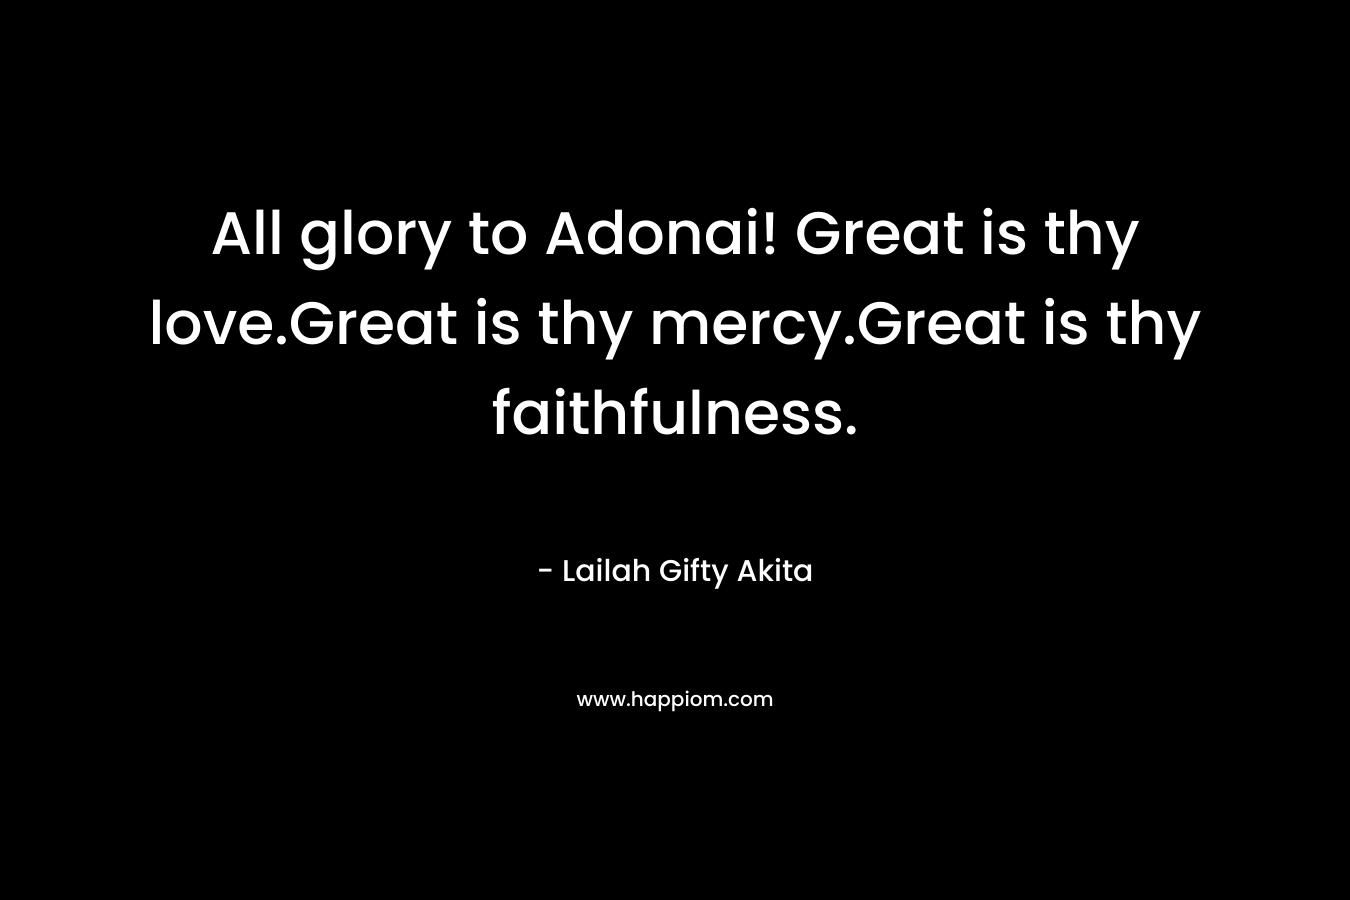 All glory to Adonai! Great is thy love.Great is thy mercy.Great is thy faithfulness.